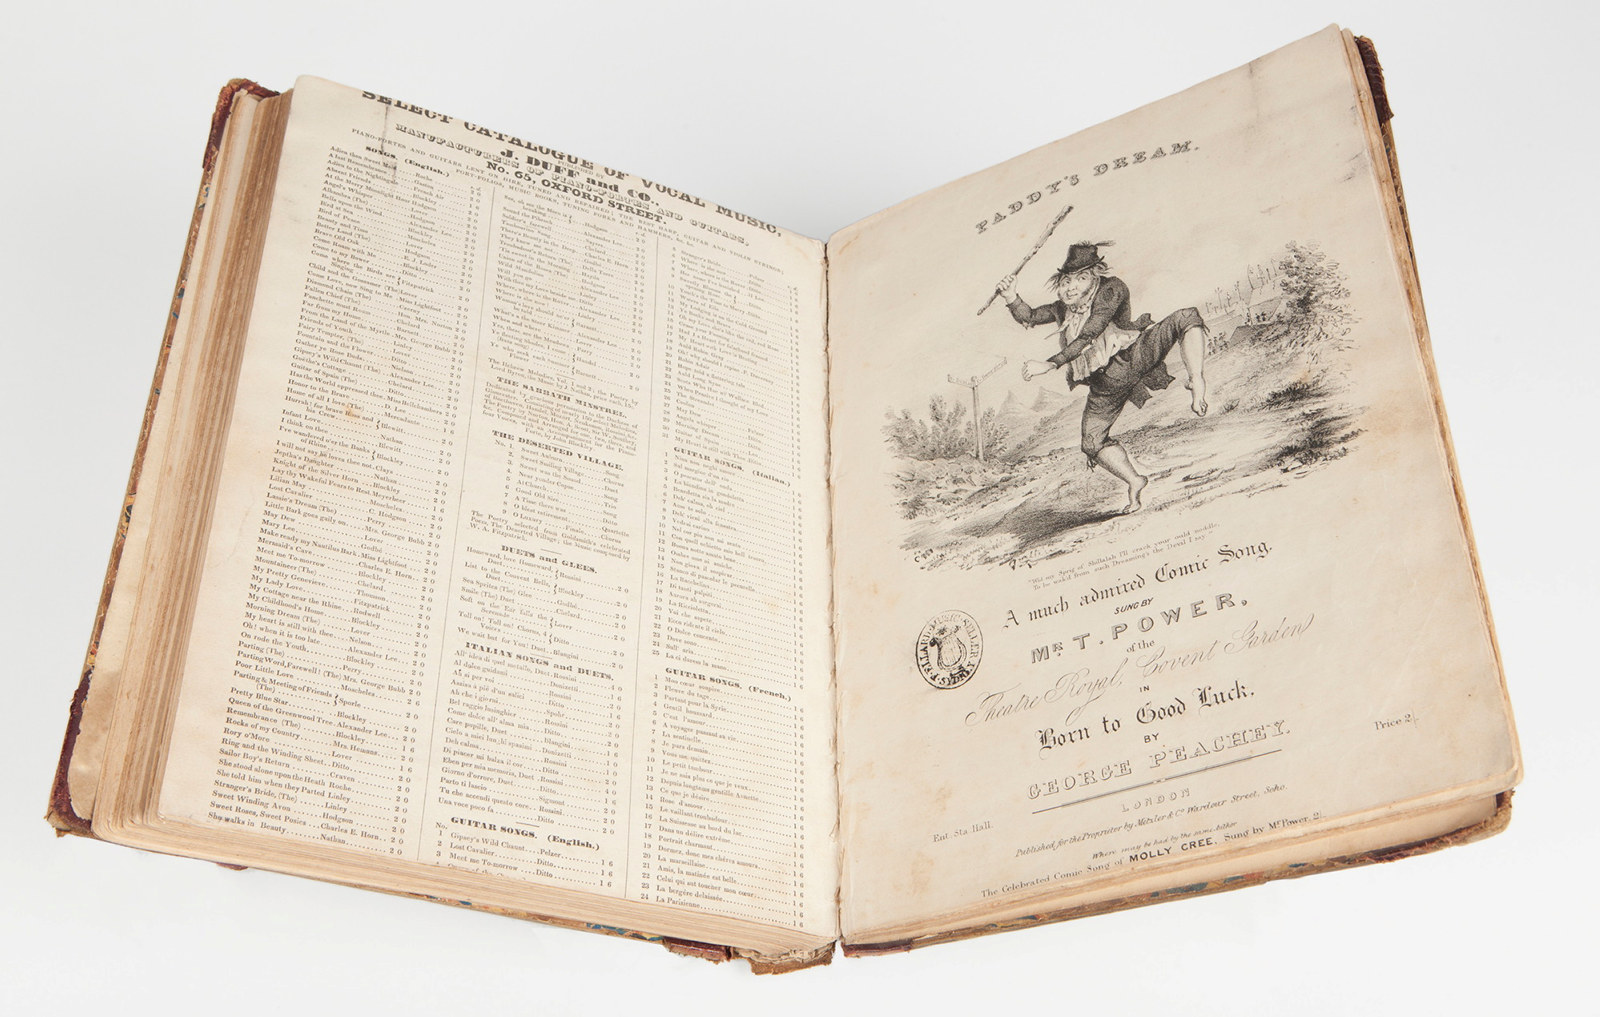 Dowling songbook - pages from a volume of sheet music, 1830s  